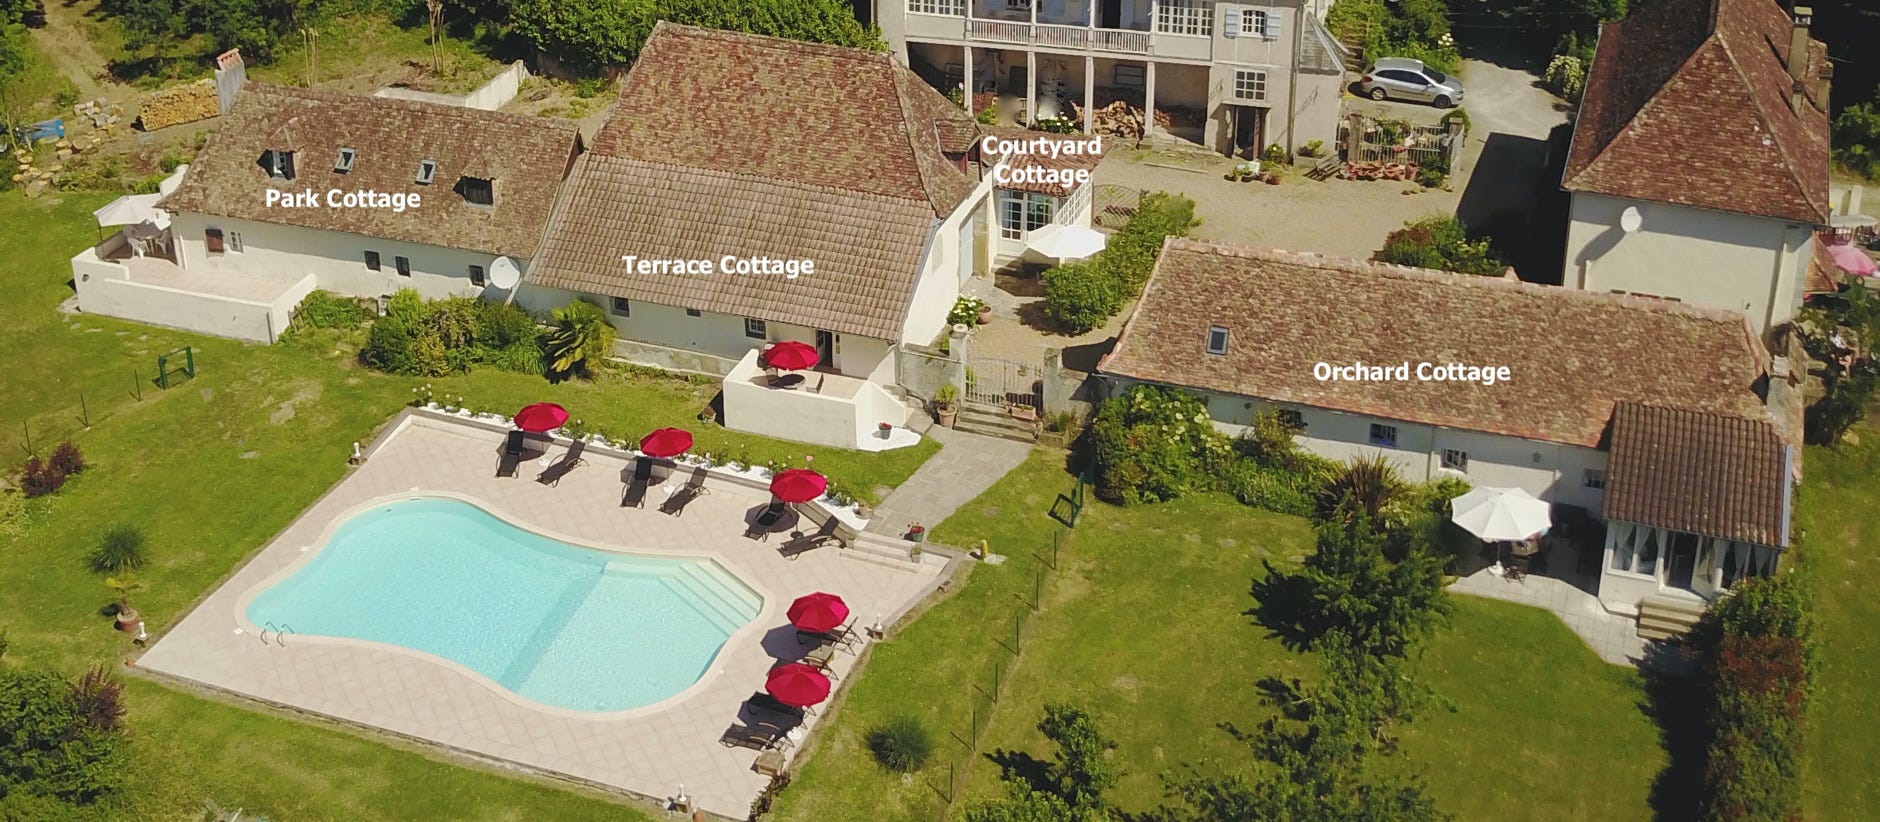 Aerial view of our luxury holiday cottages